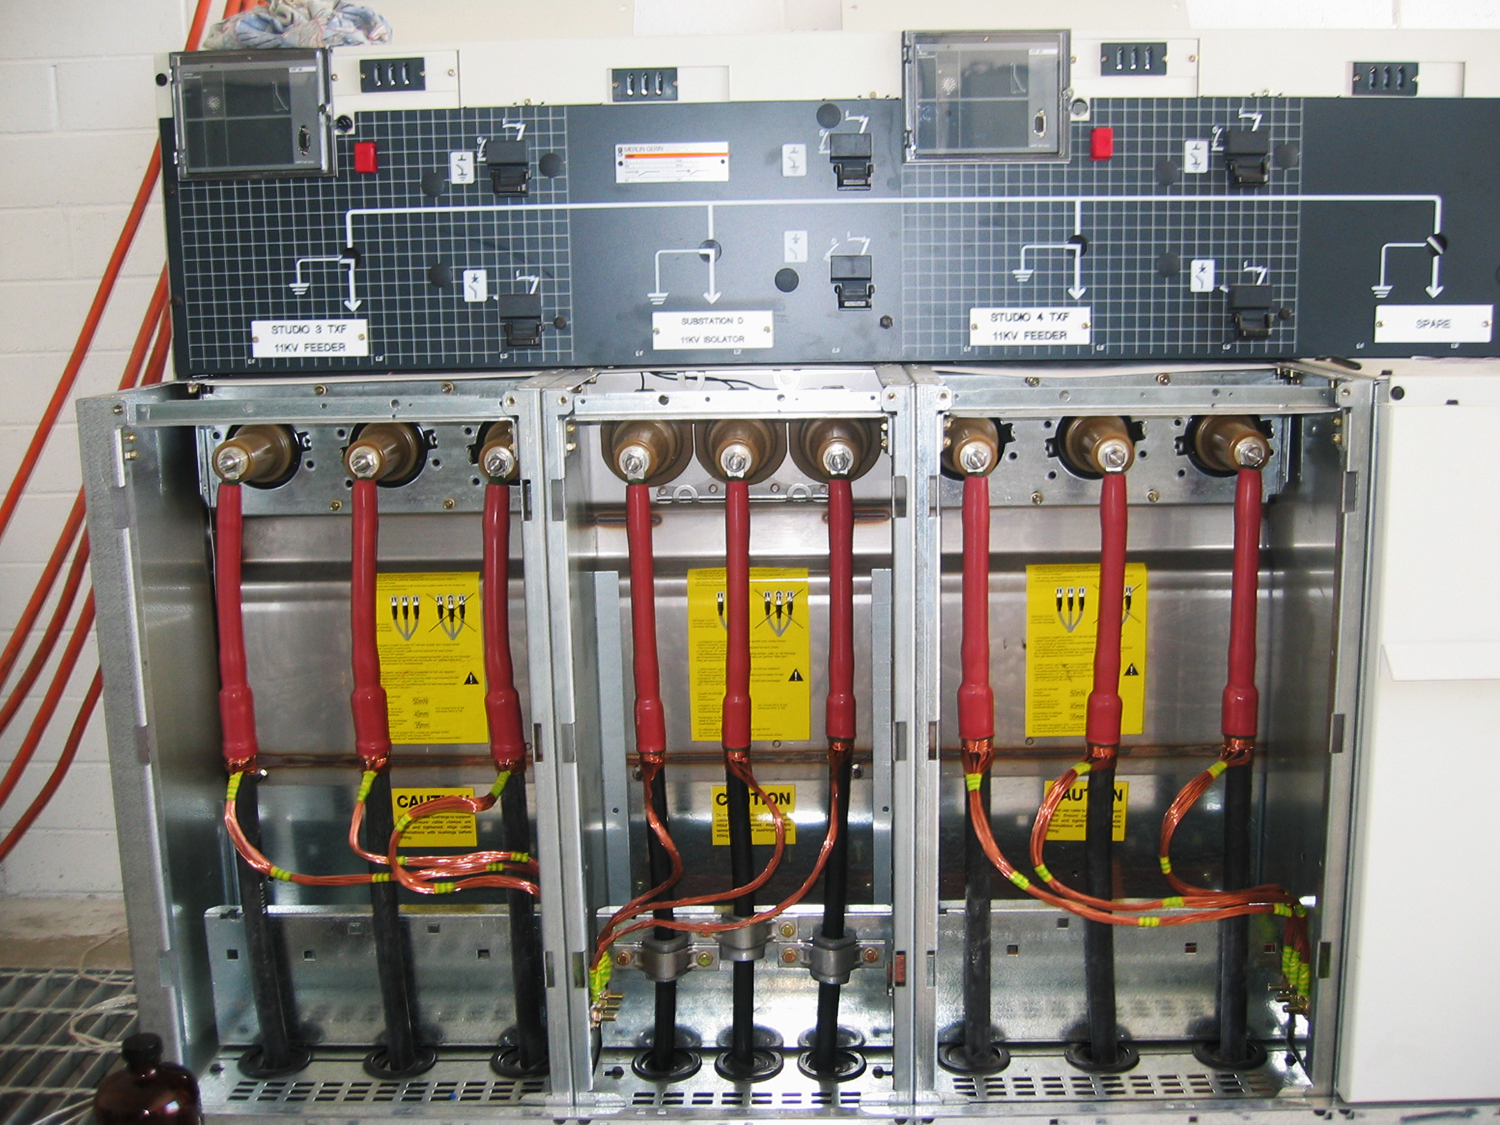 RMU installation & cable terminations